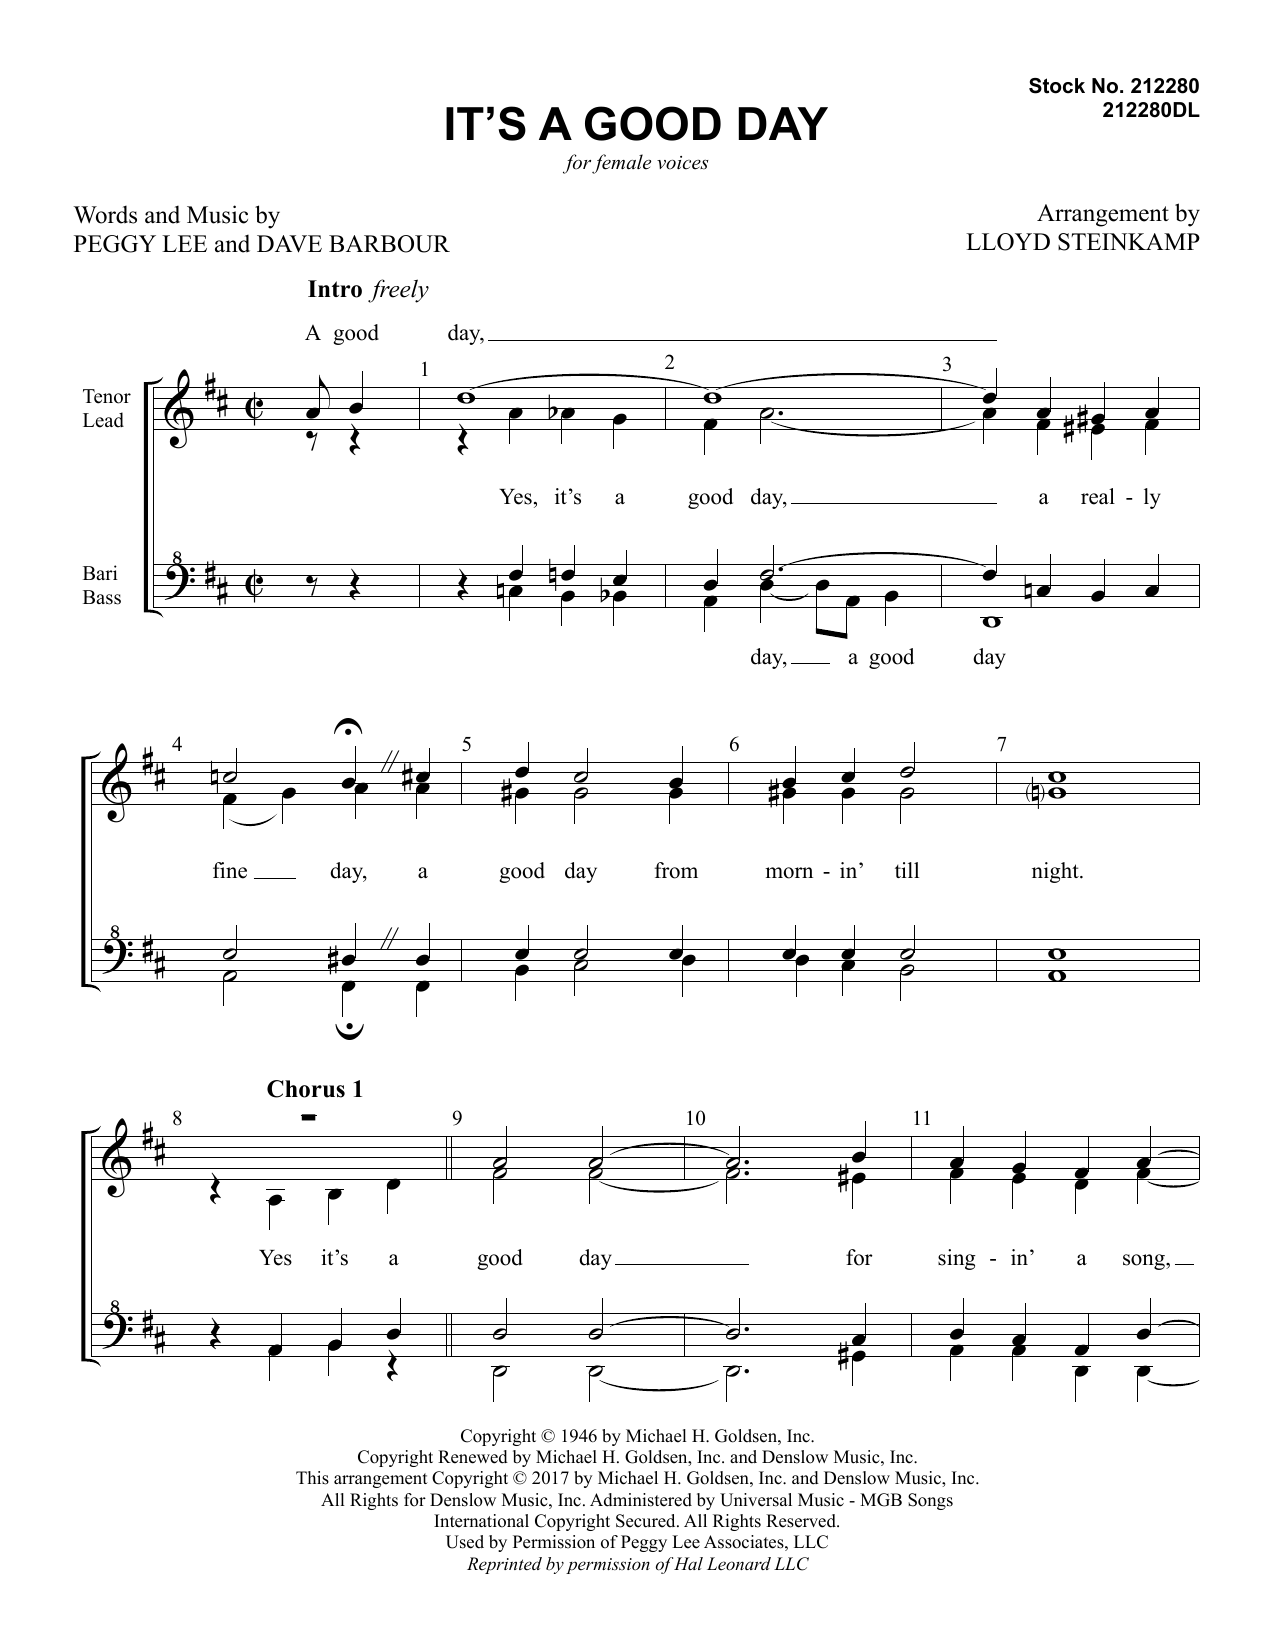 Download Peggy Lee It's a Good Day (arr. Lloyd Steinkamp) Sheet Music